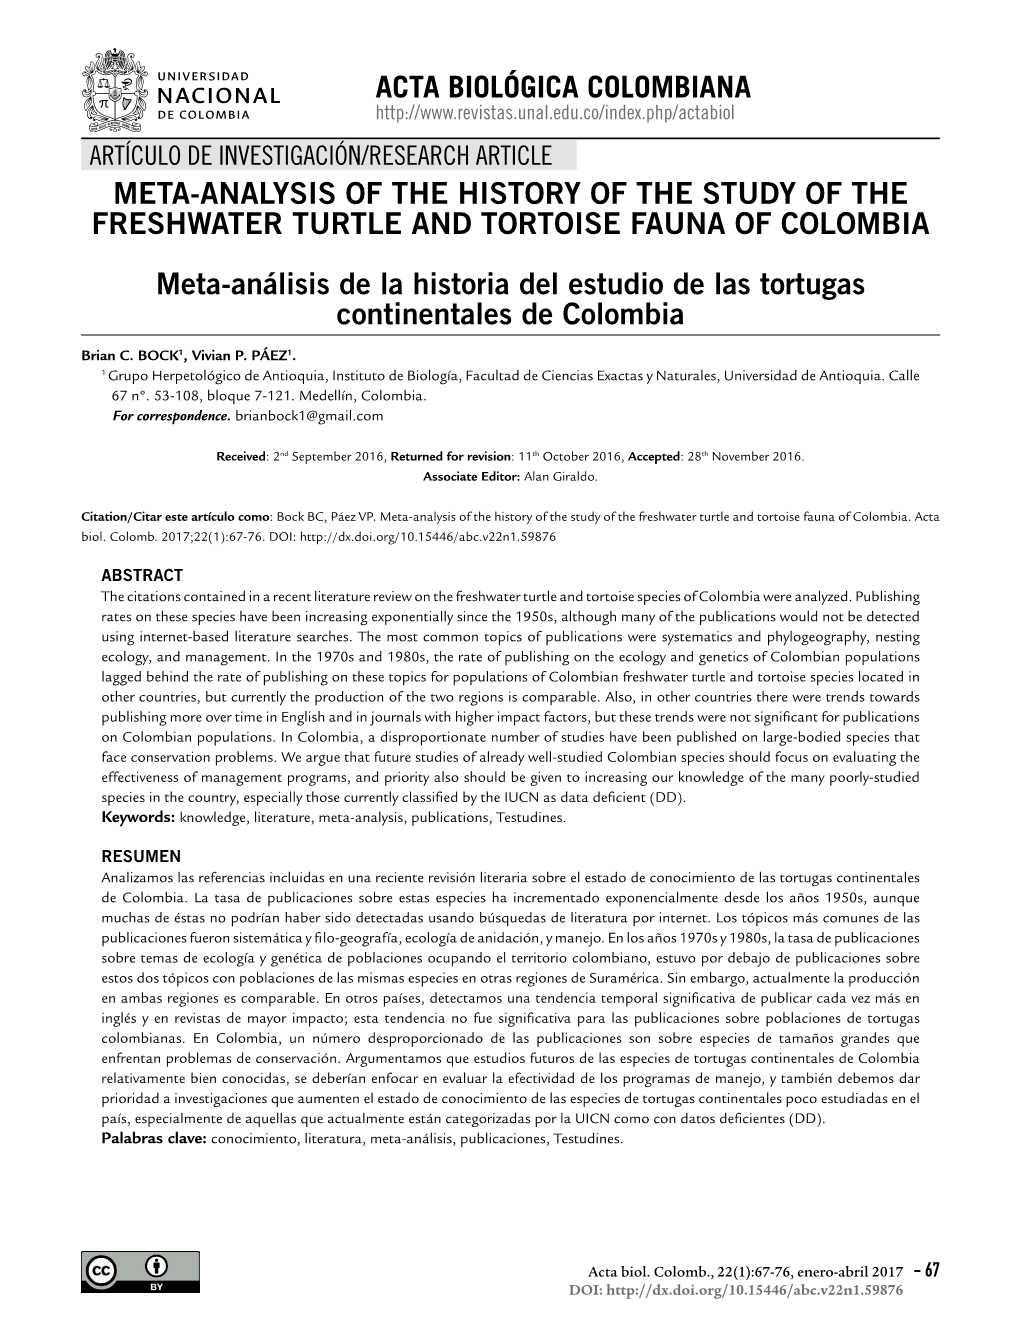 Meta-Analysis of the History of the Study